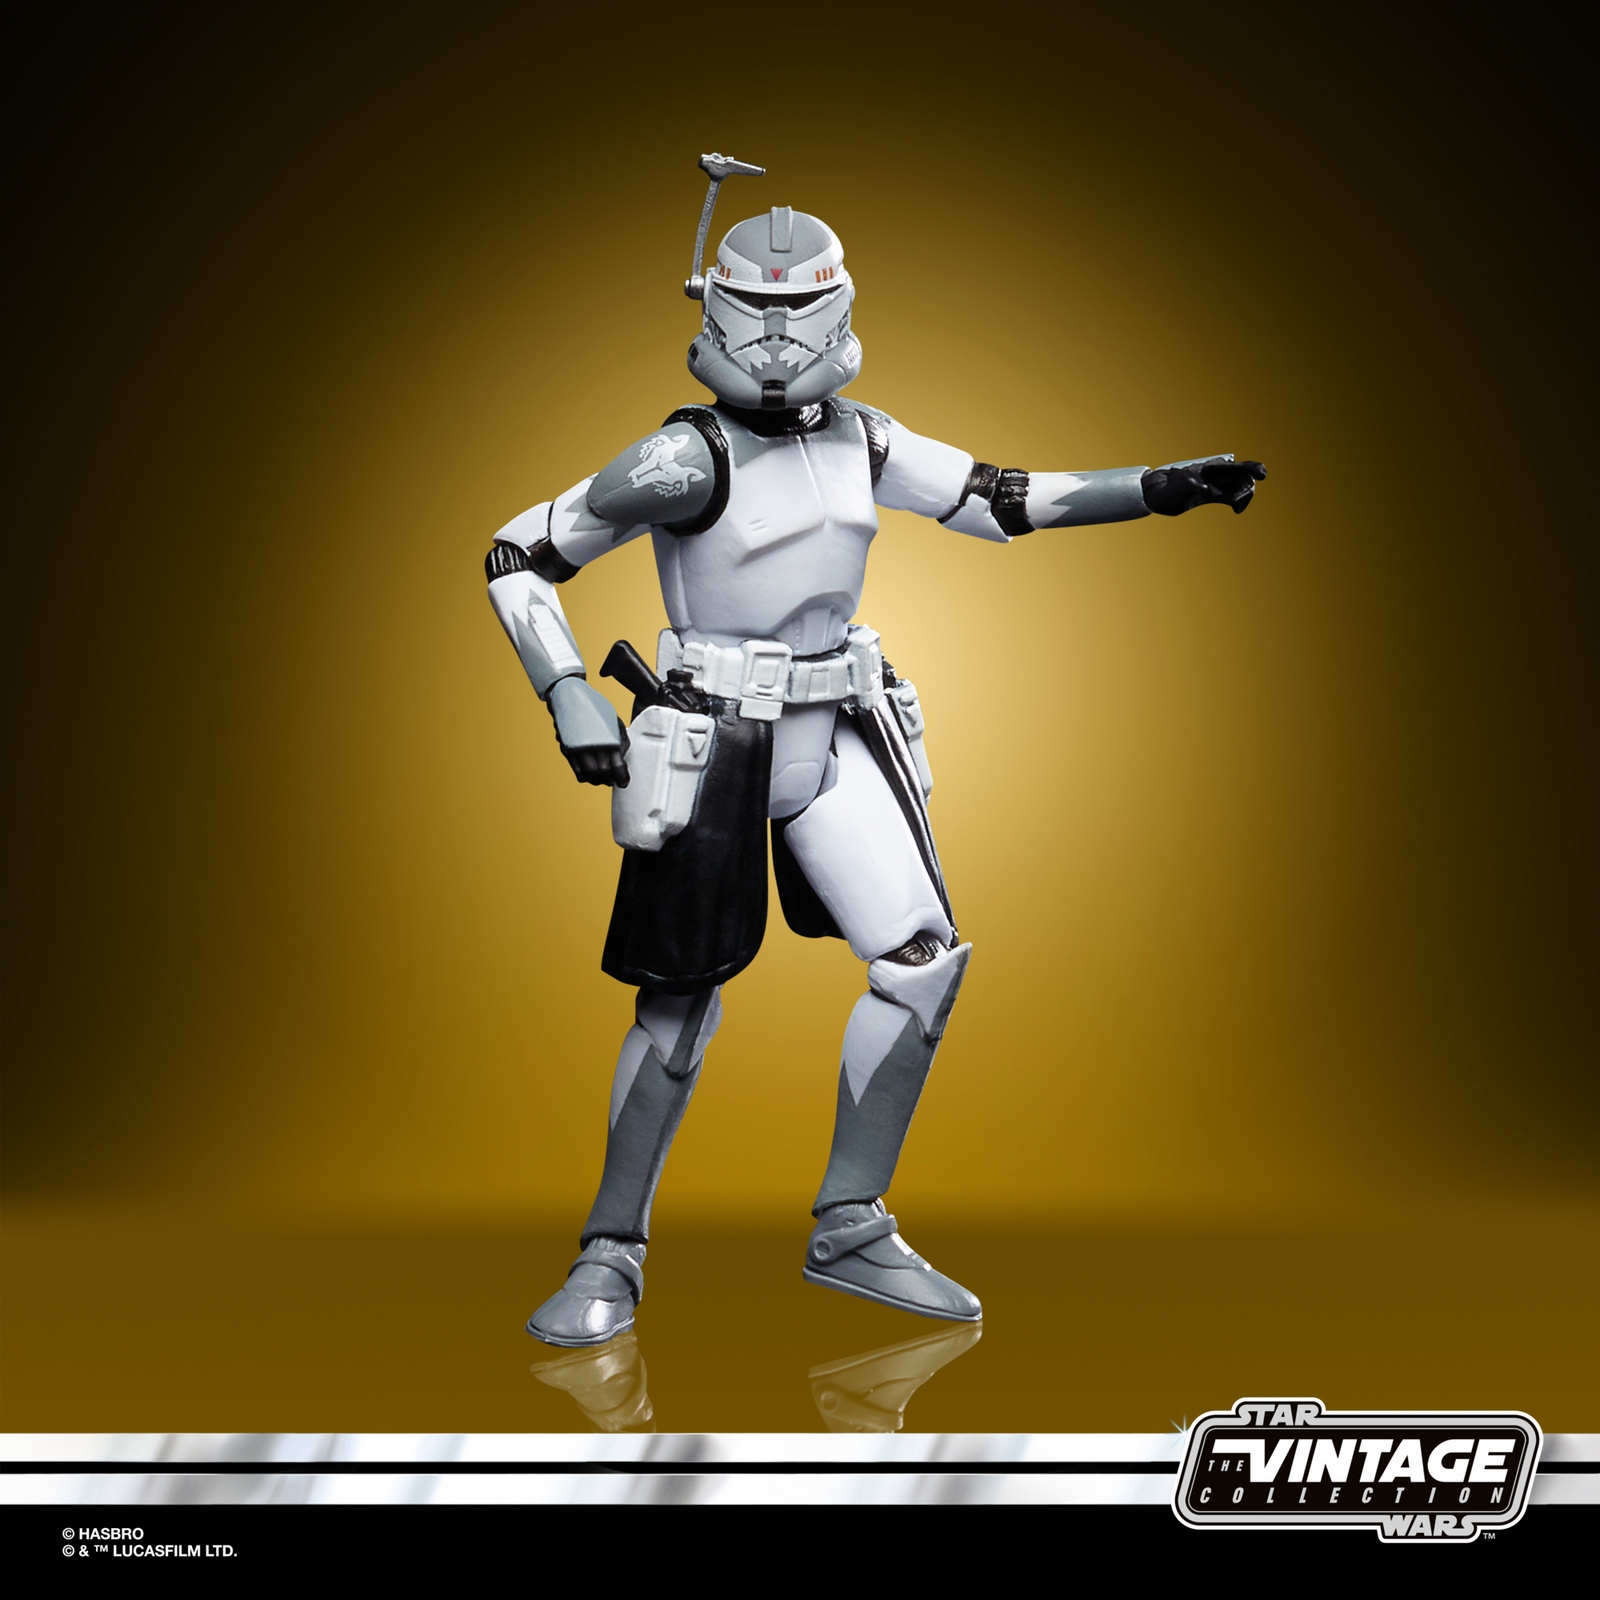 STAR WARS THE VINTAGE COLLECTION 3.75-INCH CLONE COMMANDER WOLFFE Figure - oop (2).jpg